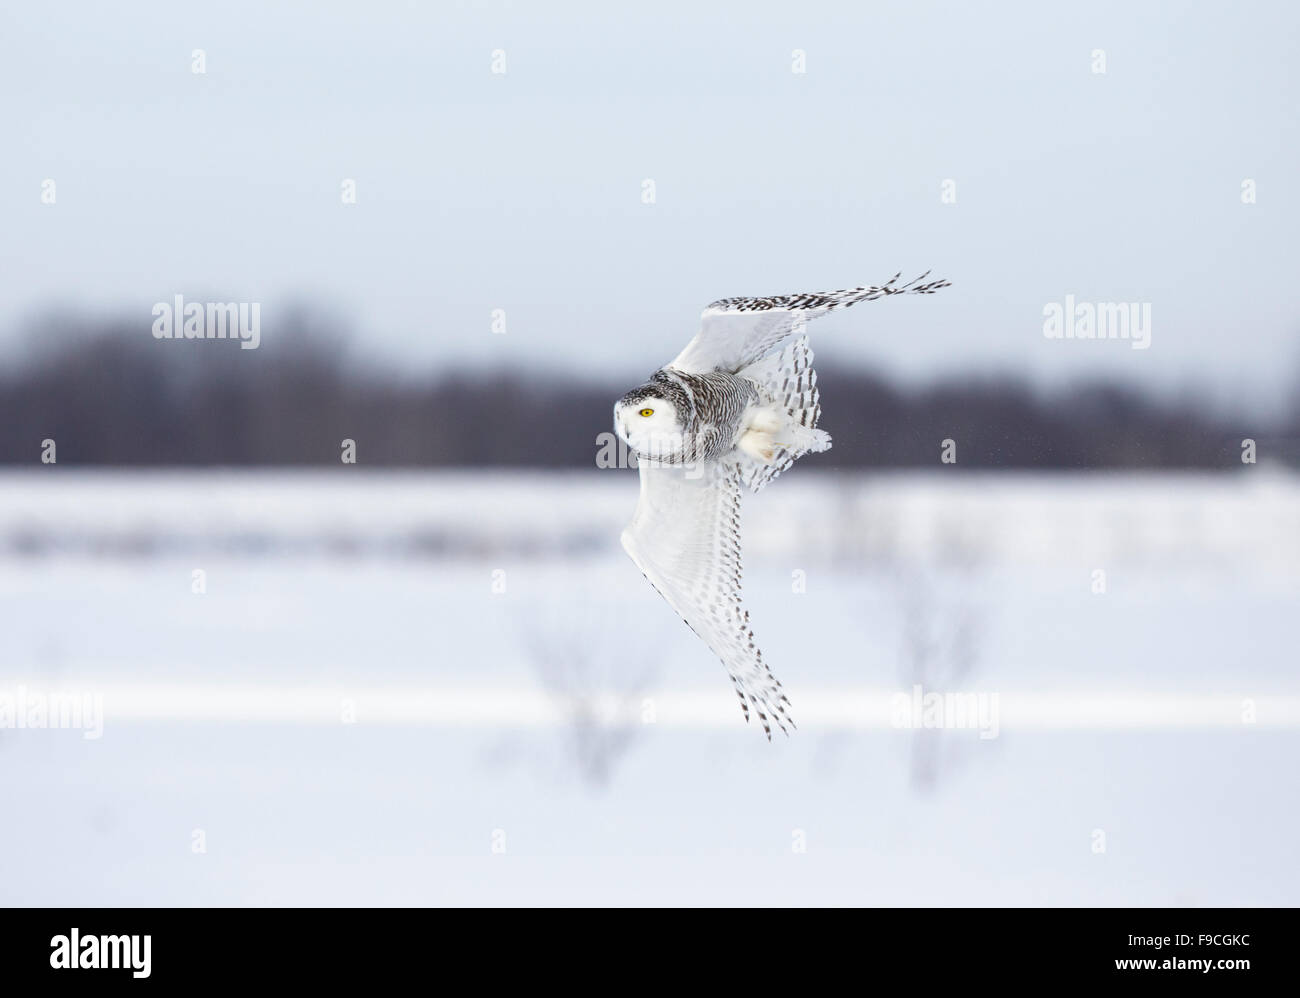 Snowy Owl, Bubo scandiacus, in winter snow covered landscape, Stock Photo